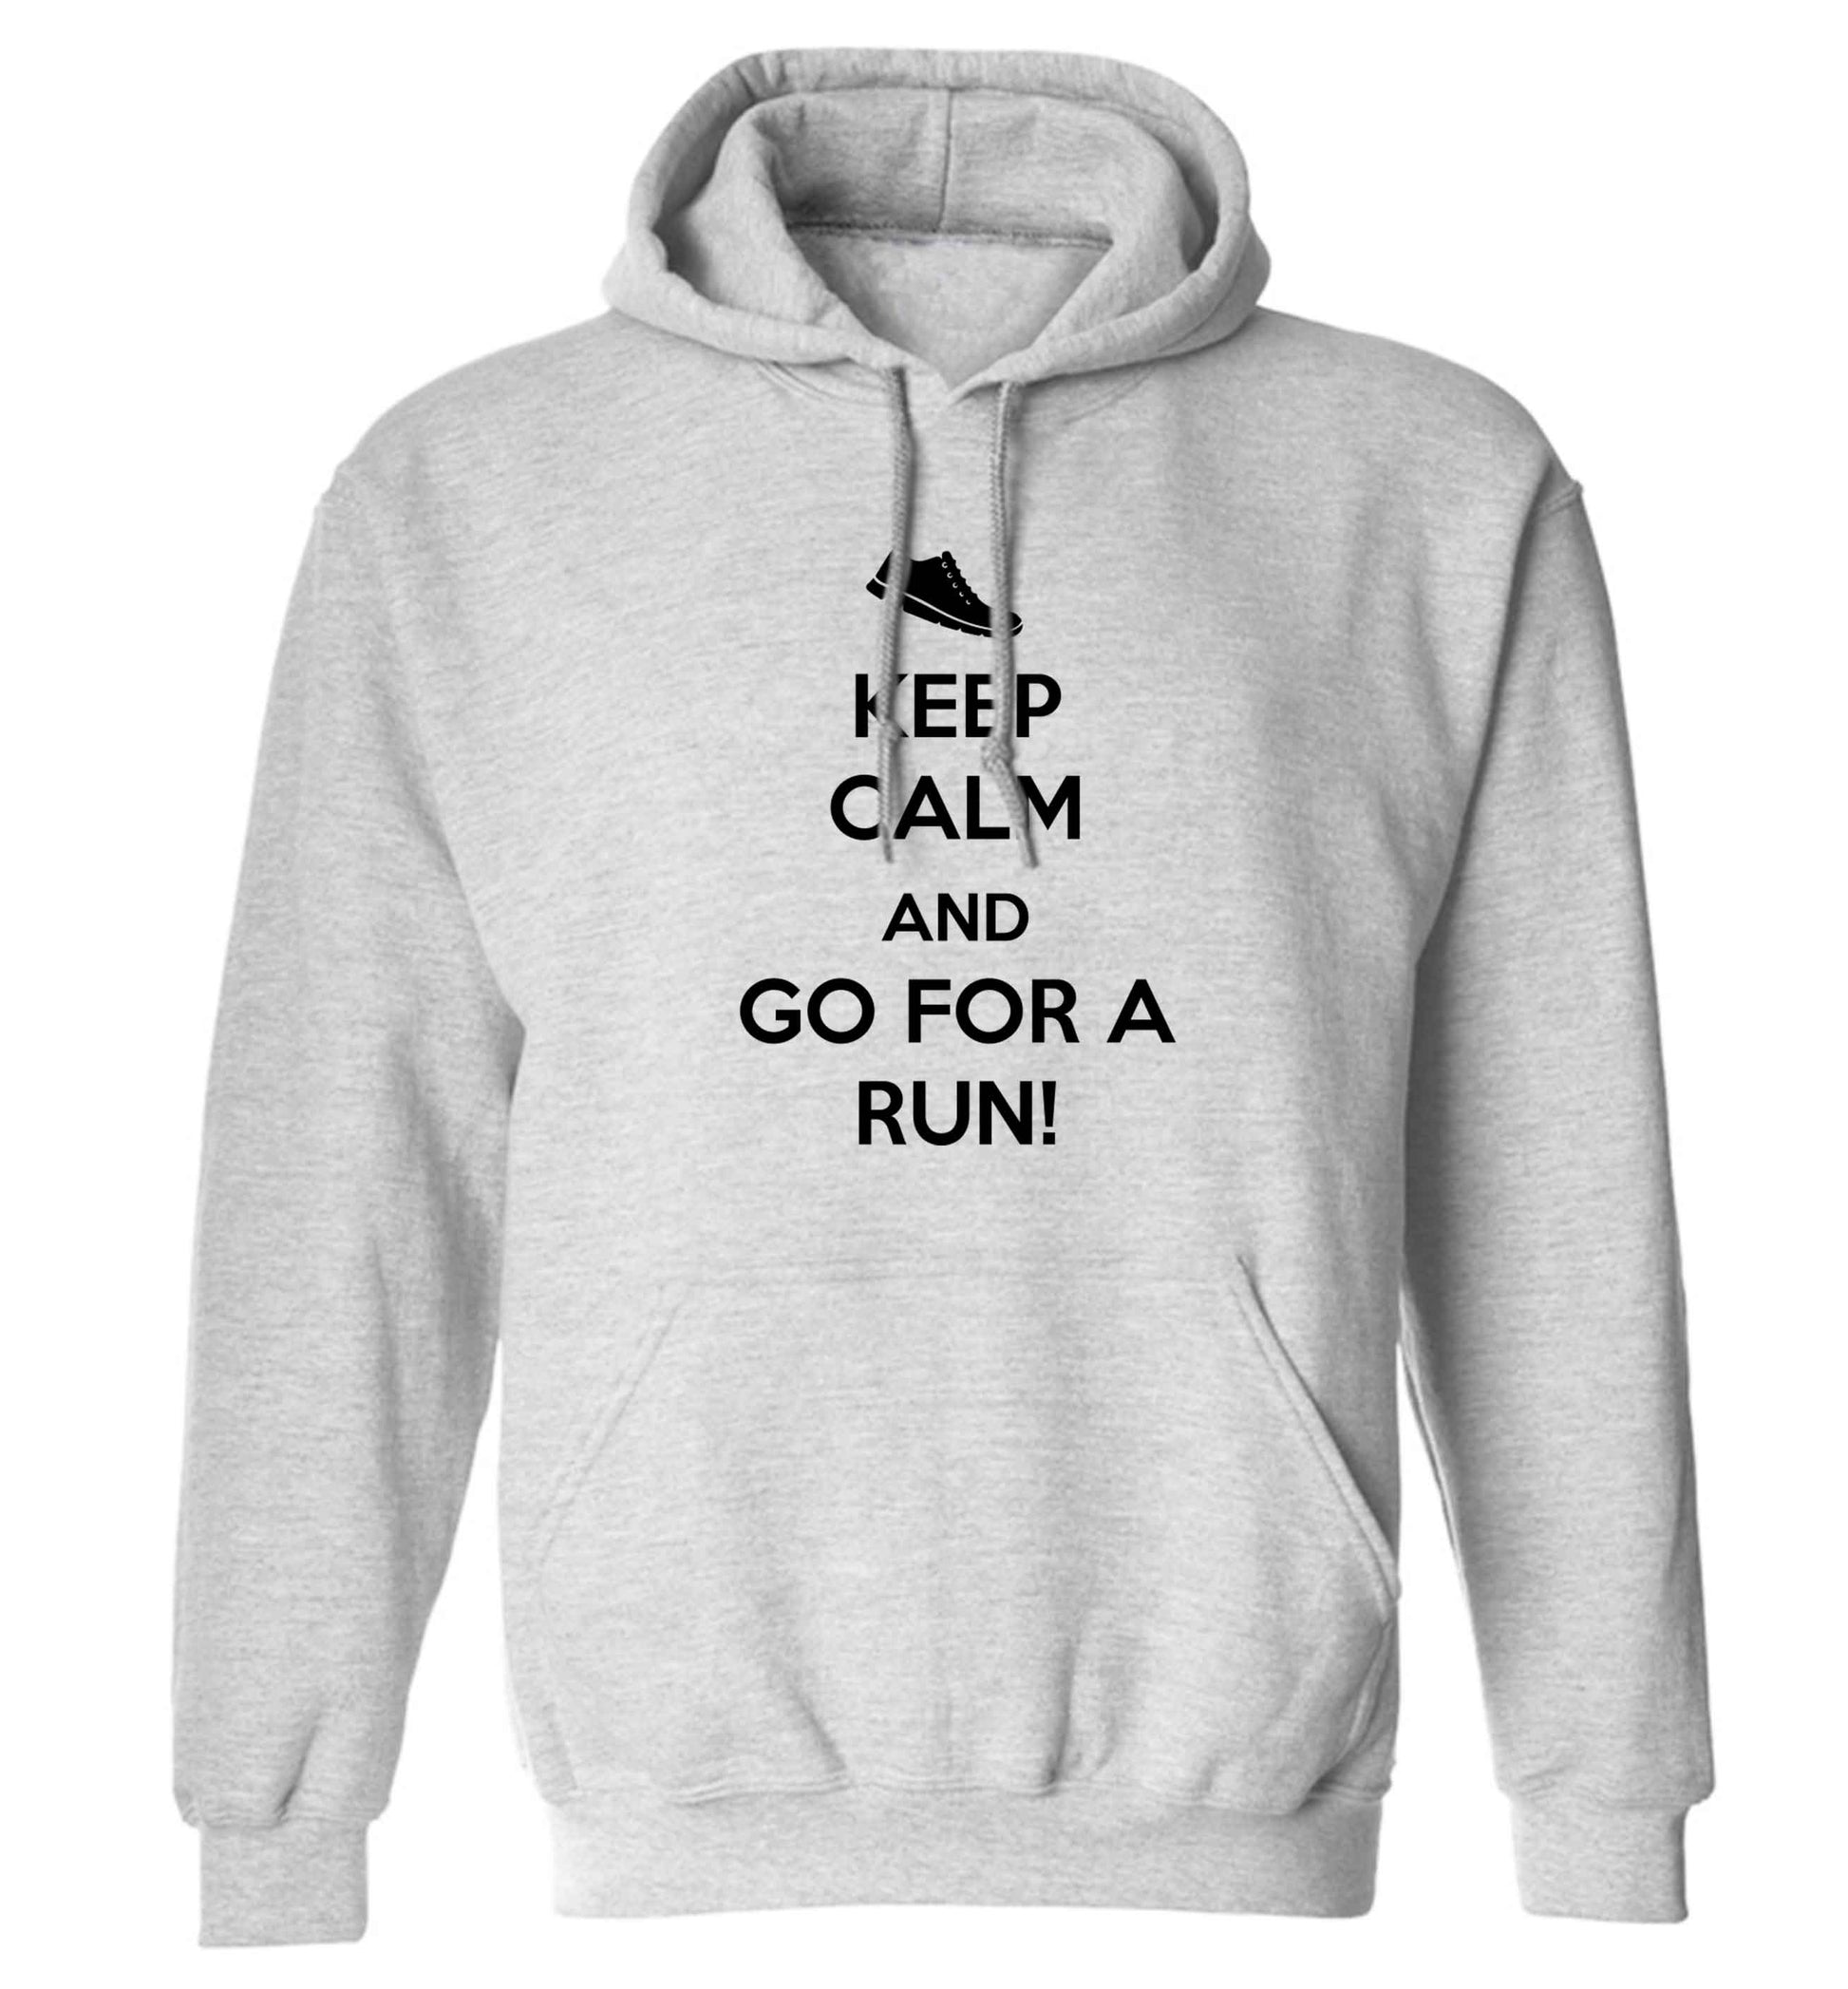 Keep calm and go for a run adults unisex grey hoodie 2XL